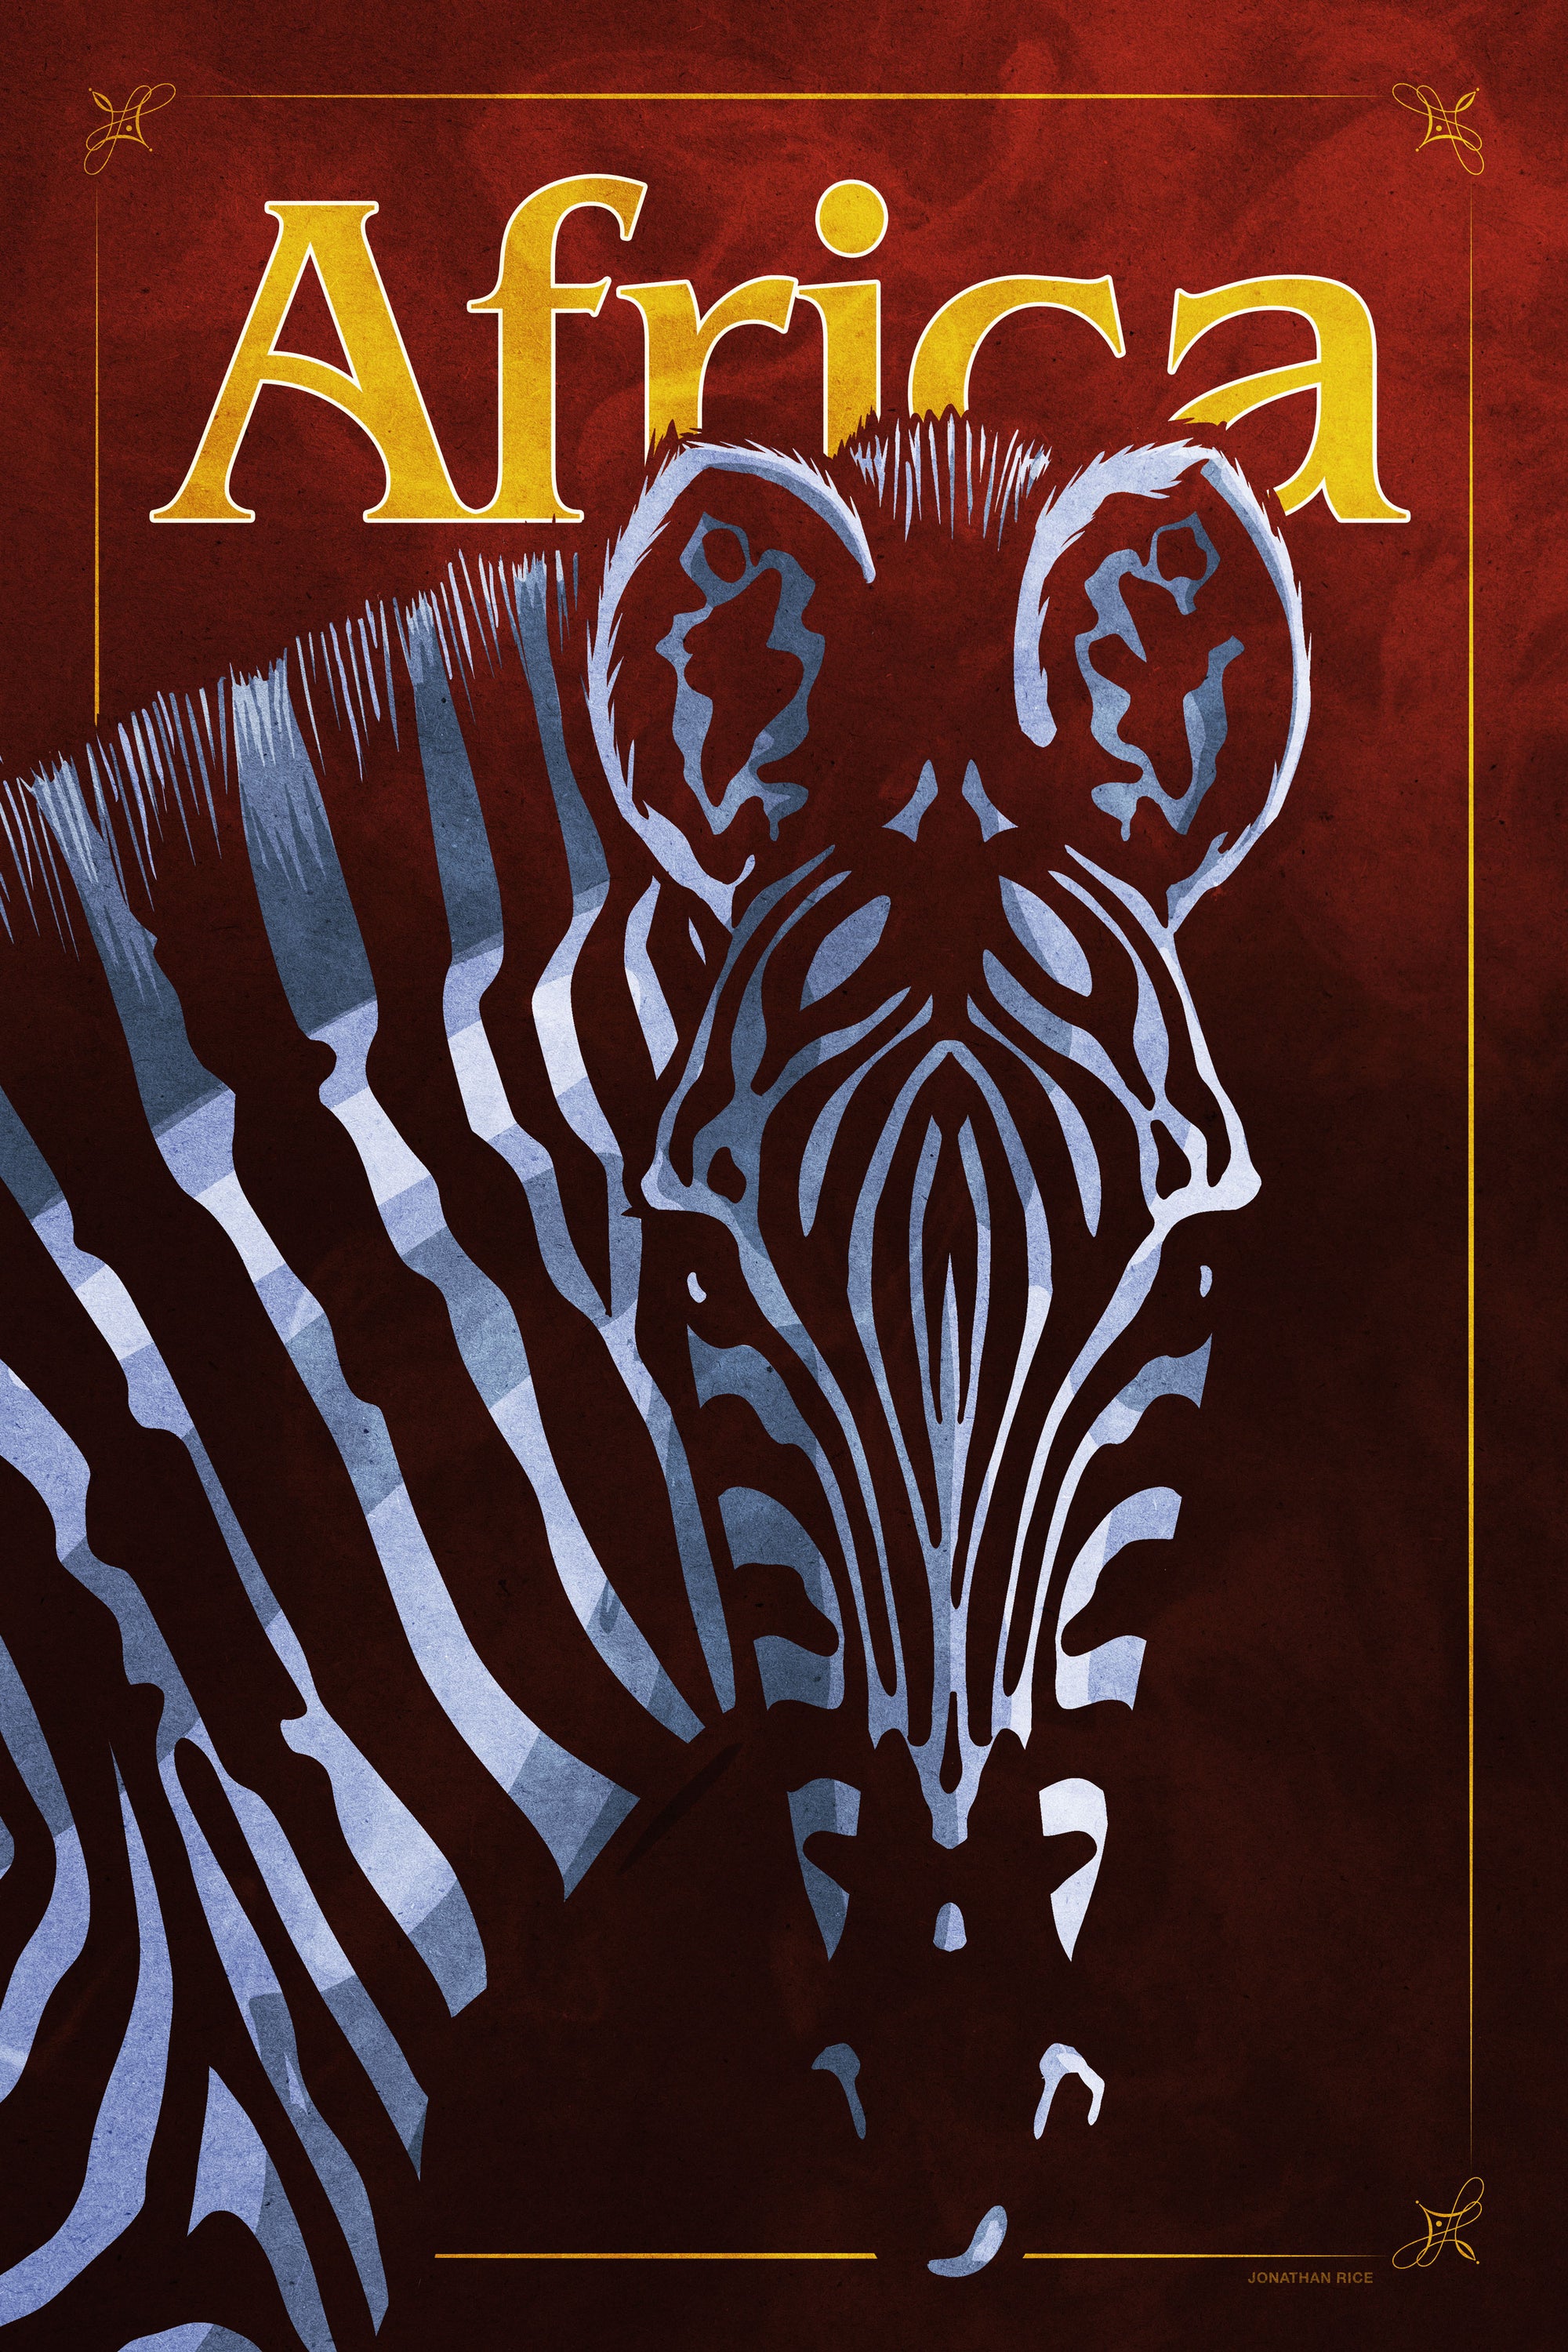 Bold graphic giclée art print of an African Zebra. Print shows an African Zebra blending into a dark background and overlapping the word “Africa”.